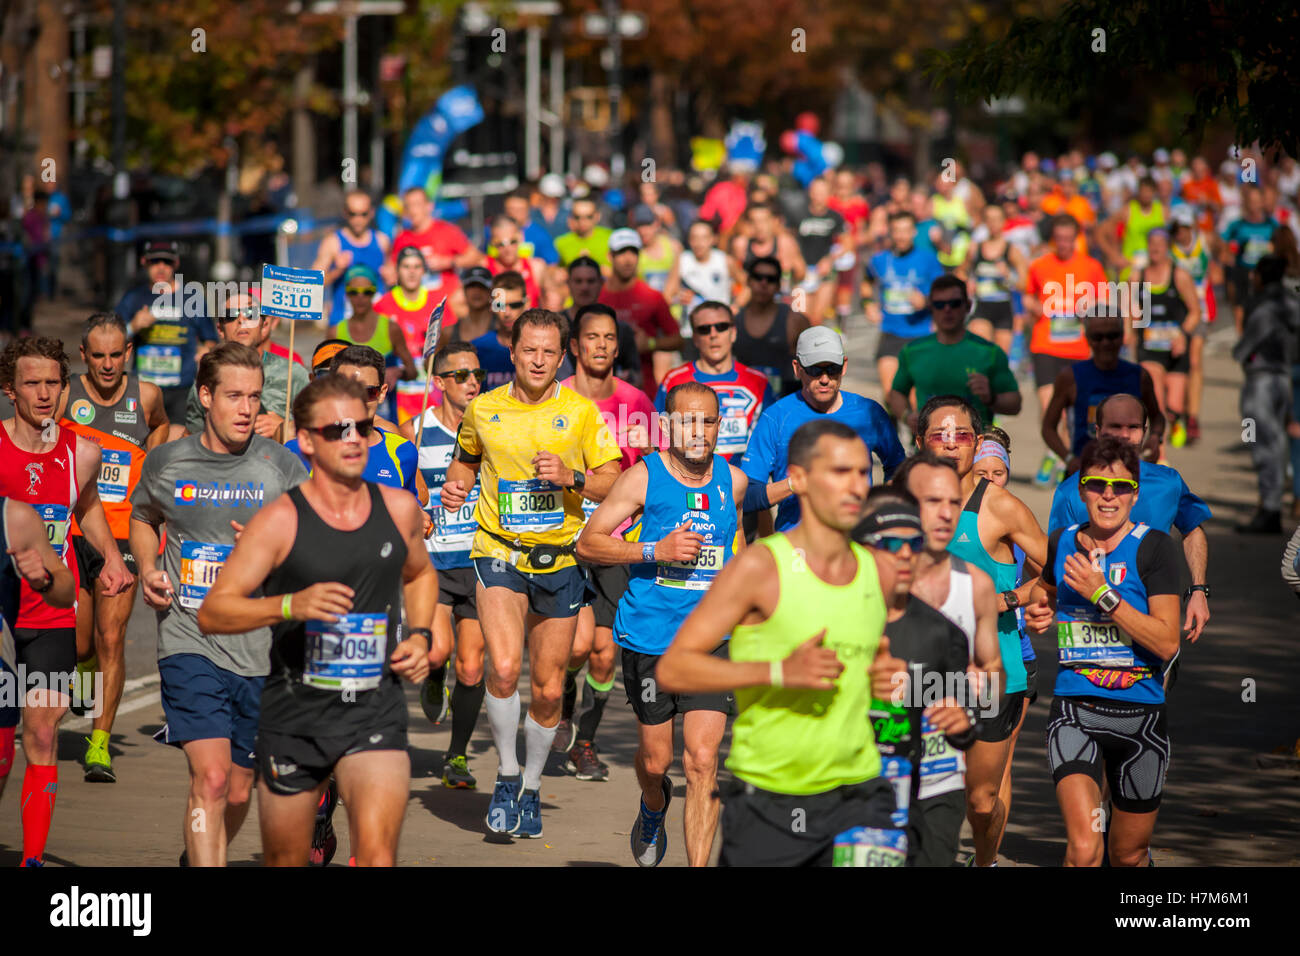 New York, USA. 06th Nov, 2016. Runners pass through Harlem in New York near the 22 mile mark near Mount Morris Park on Sunday, November 6, 2016 in the 46th annual TCS New York City Marathon. About 50,000 runners from over 120 countries are expected to compete in the race, the world's largest marathon. ( © Richard B. Levine) Credit:  Richard Levine/Alamy Live News Stock Photo